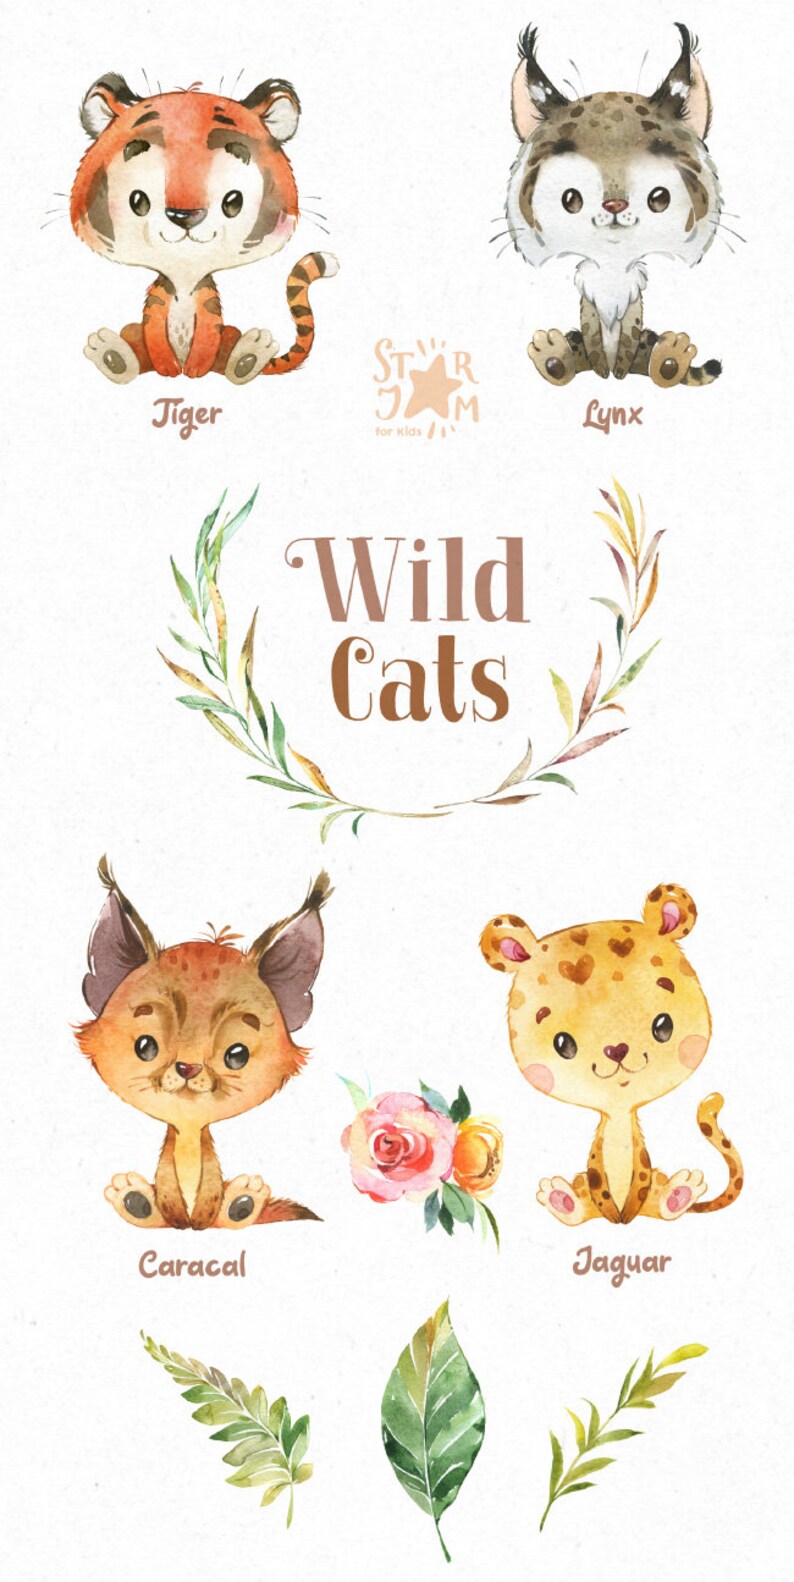 Wild Cats. Watercolor little animal clipart, Tiger, Lynx, Caracal, Jaguar, cub, baby, flowers, wreath, birthday, baby-born, baby-shower image 2